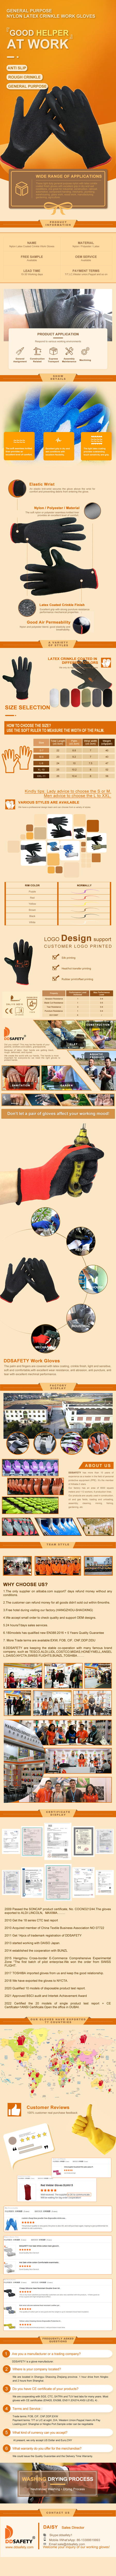 Black Mens Safety Work Gloves With Latex Dipped Palms Ce 3121 - DNL119 Black Mens Safety Work Gloves With Latex Dipped Palms Ce 3121 - DNL119 gloves,latex dipped gloves,black latex gloves,safety work gloves,mens gloves